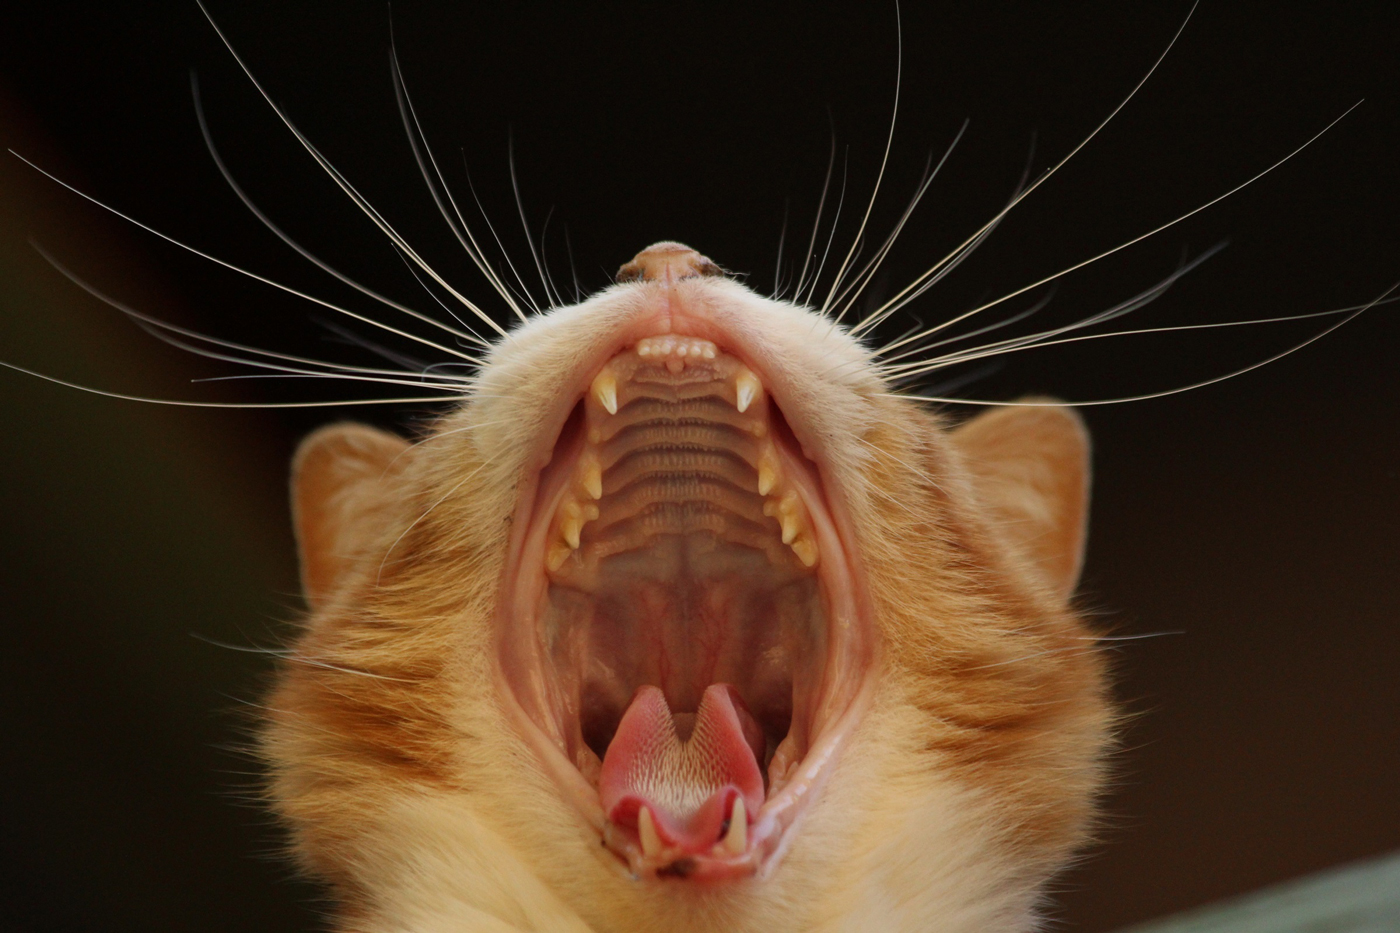 A cat with its mouth open wide during a sneeze